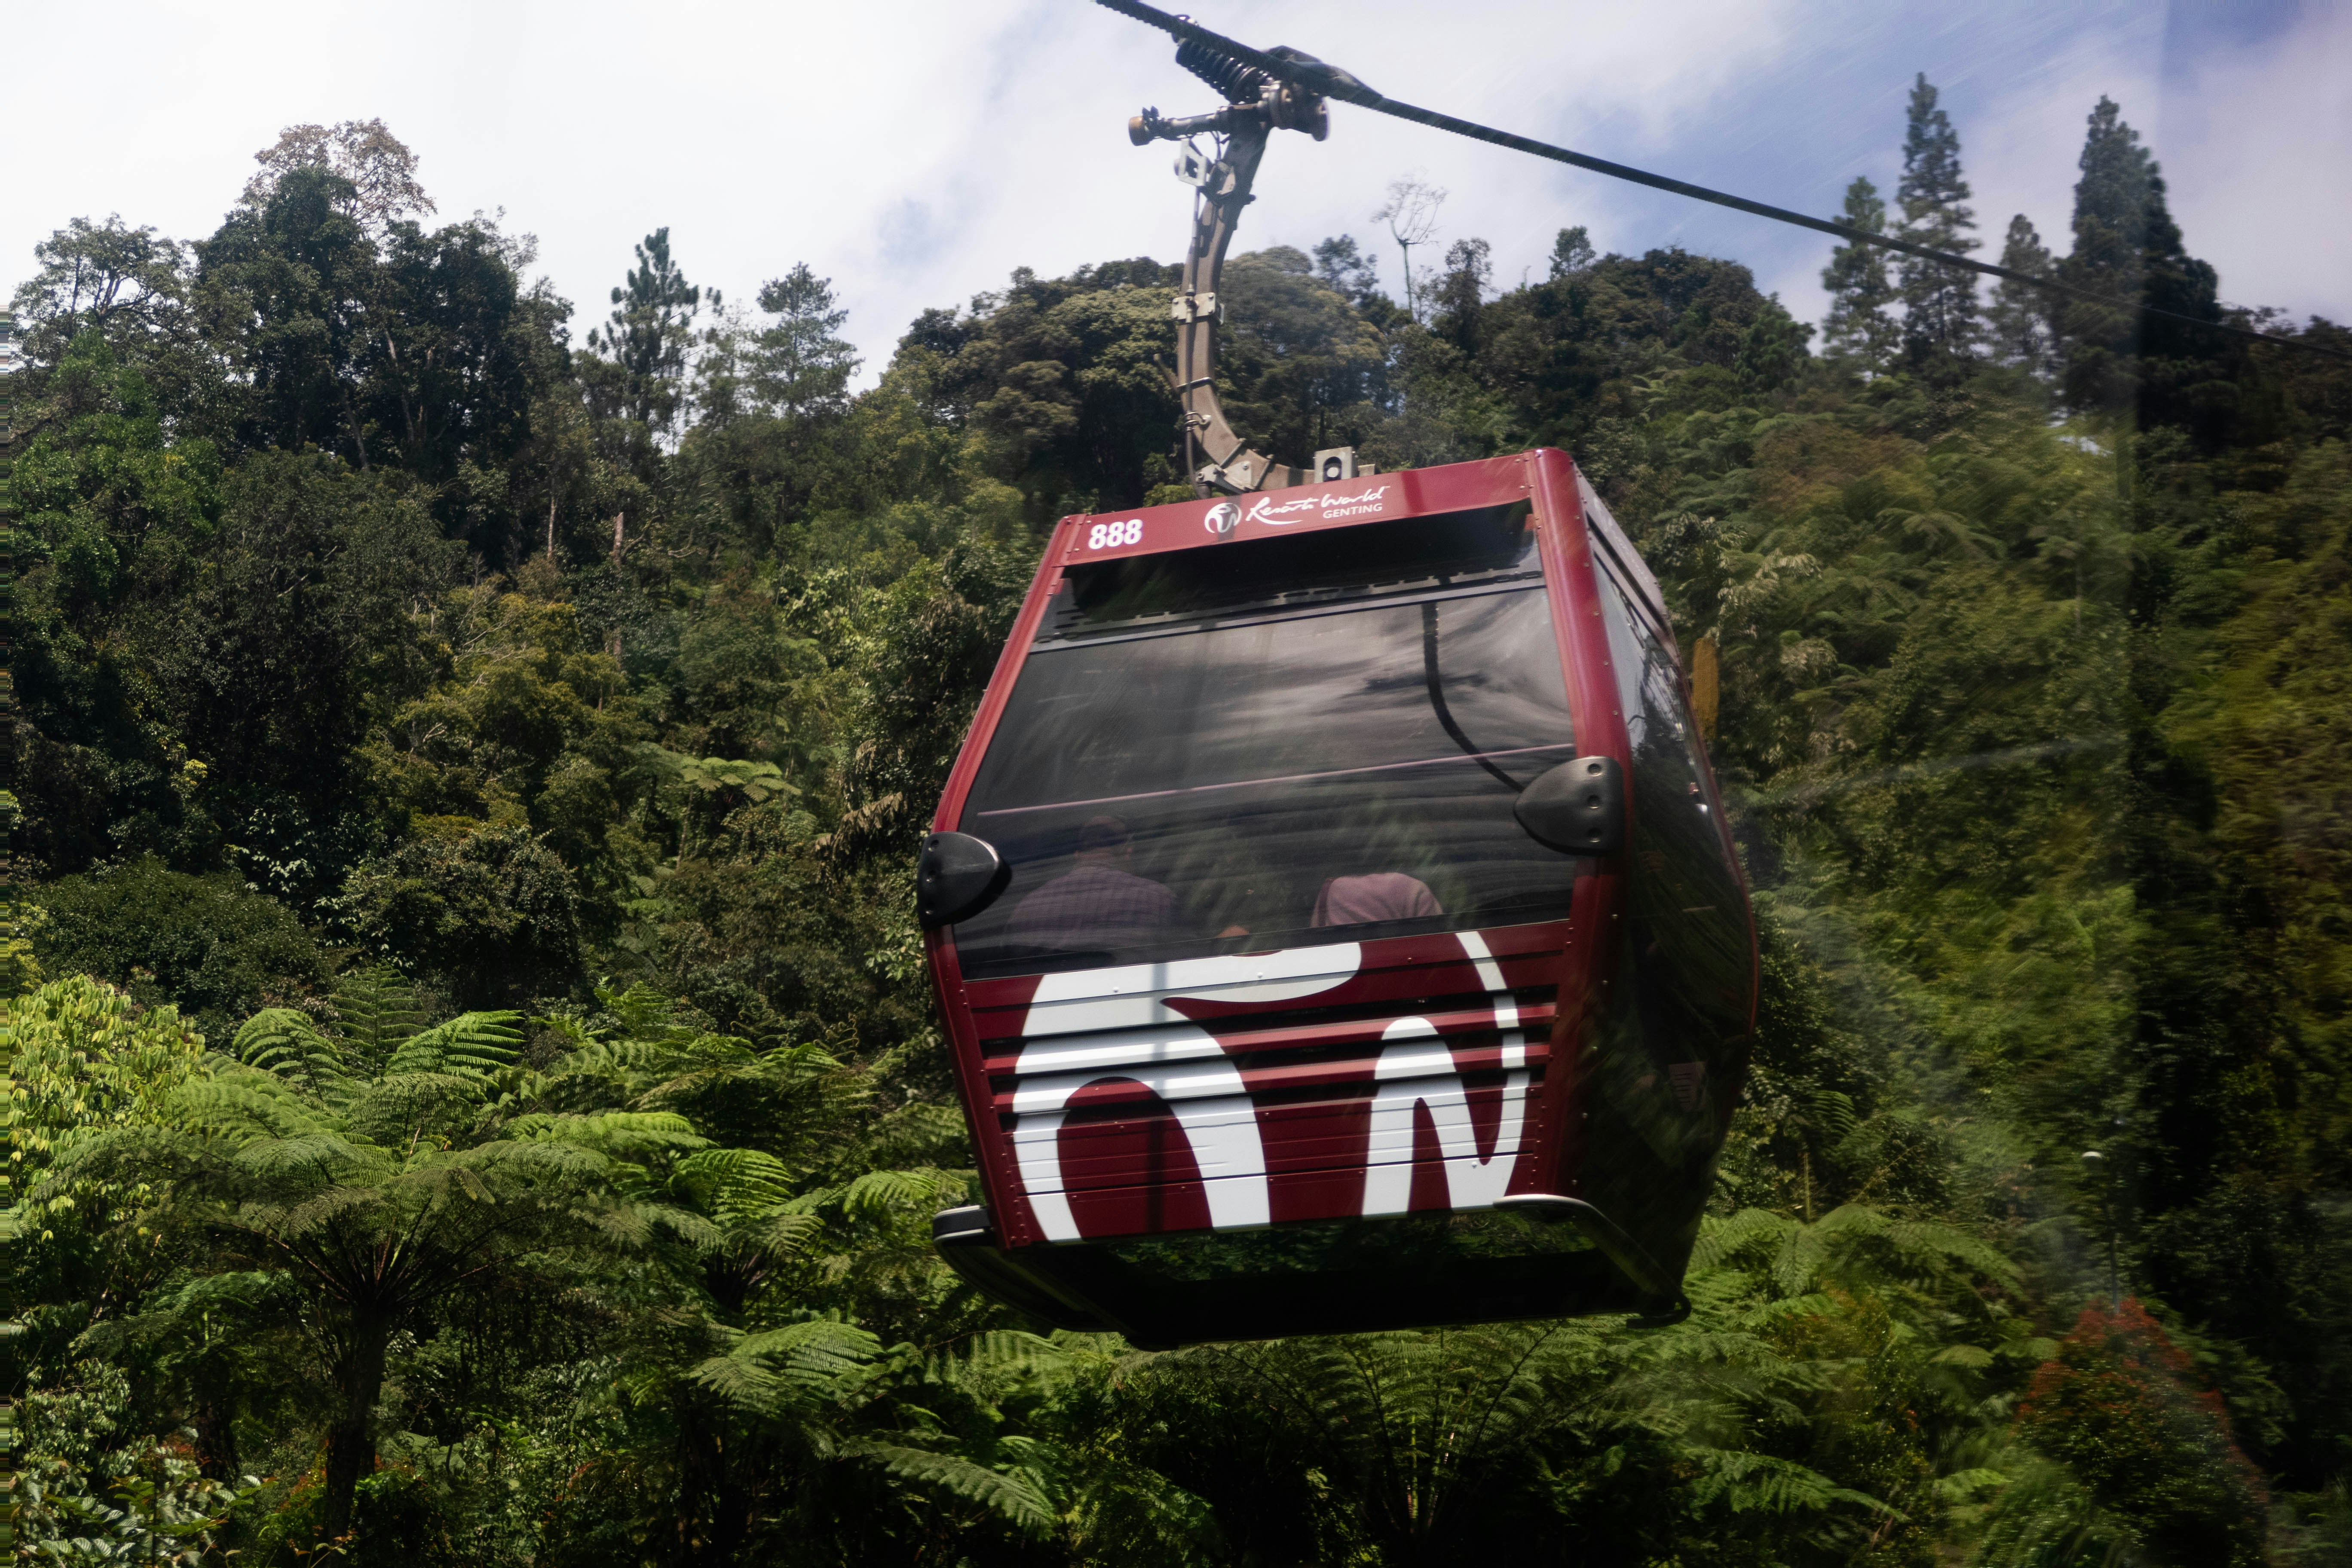 Genting Resort World cable car. Numbered 888.